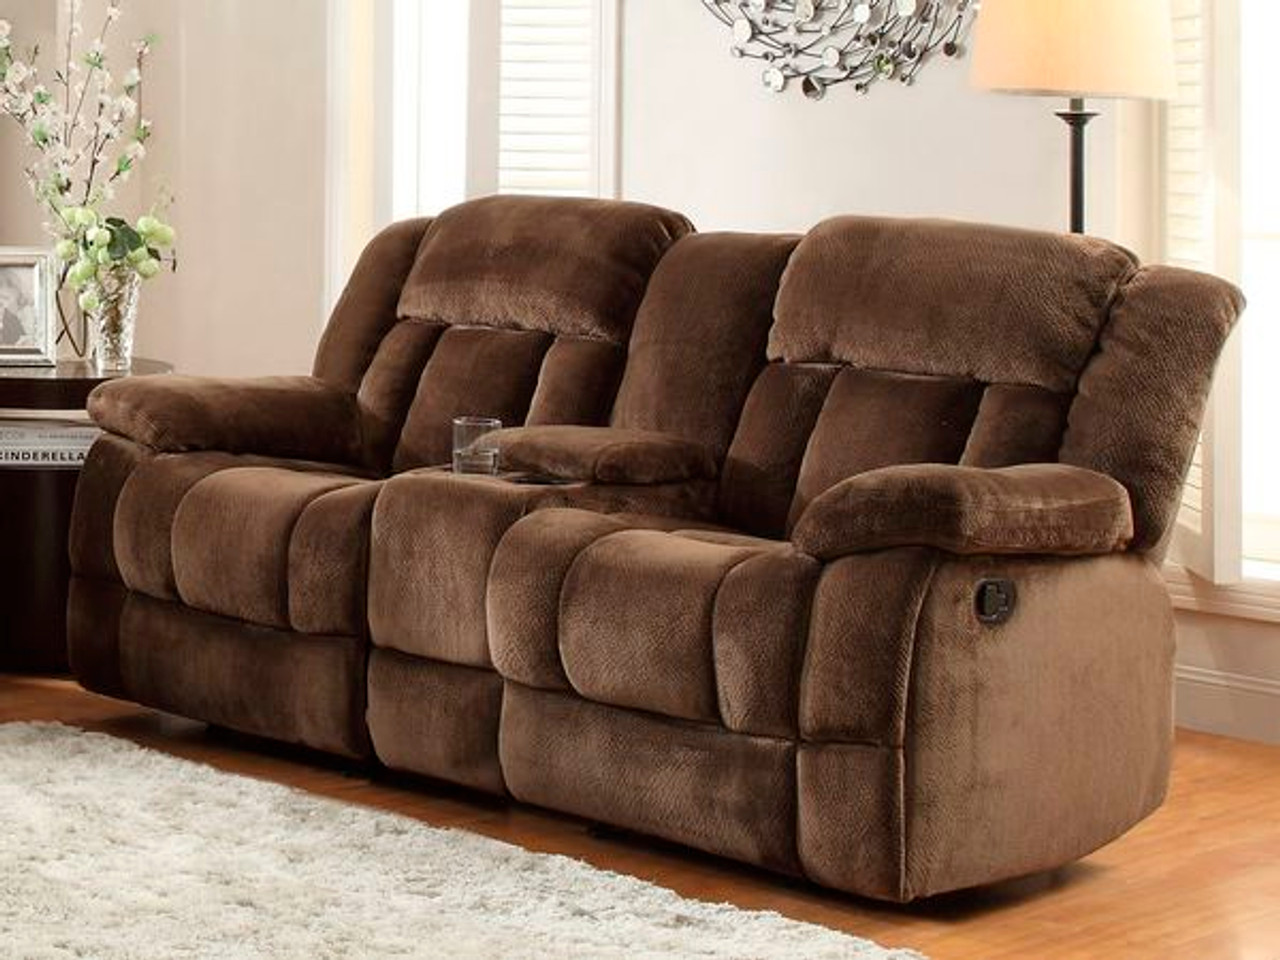 Homelegance Laurelton Dual Reclining Loveseat With Console